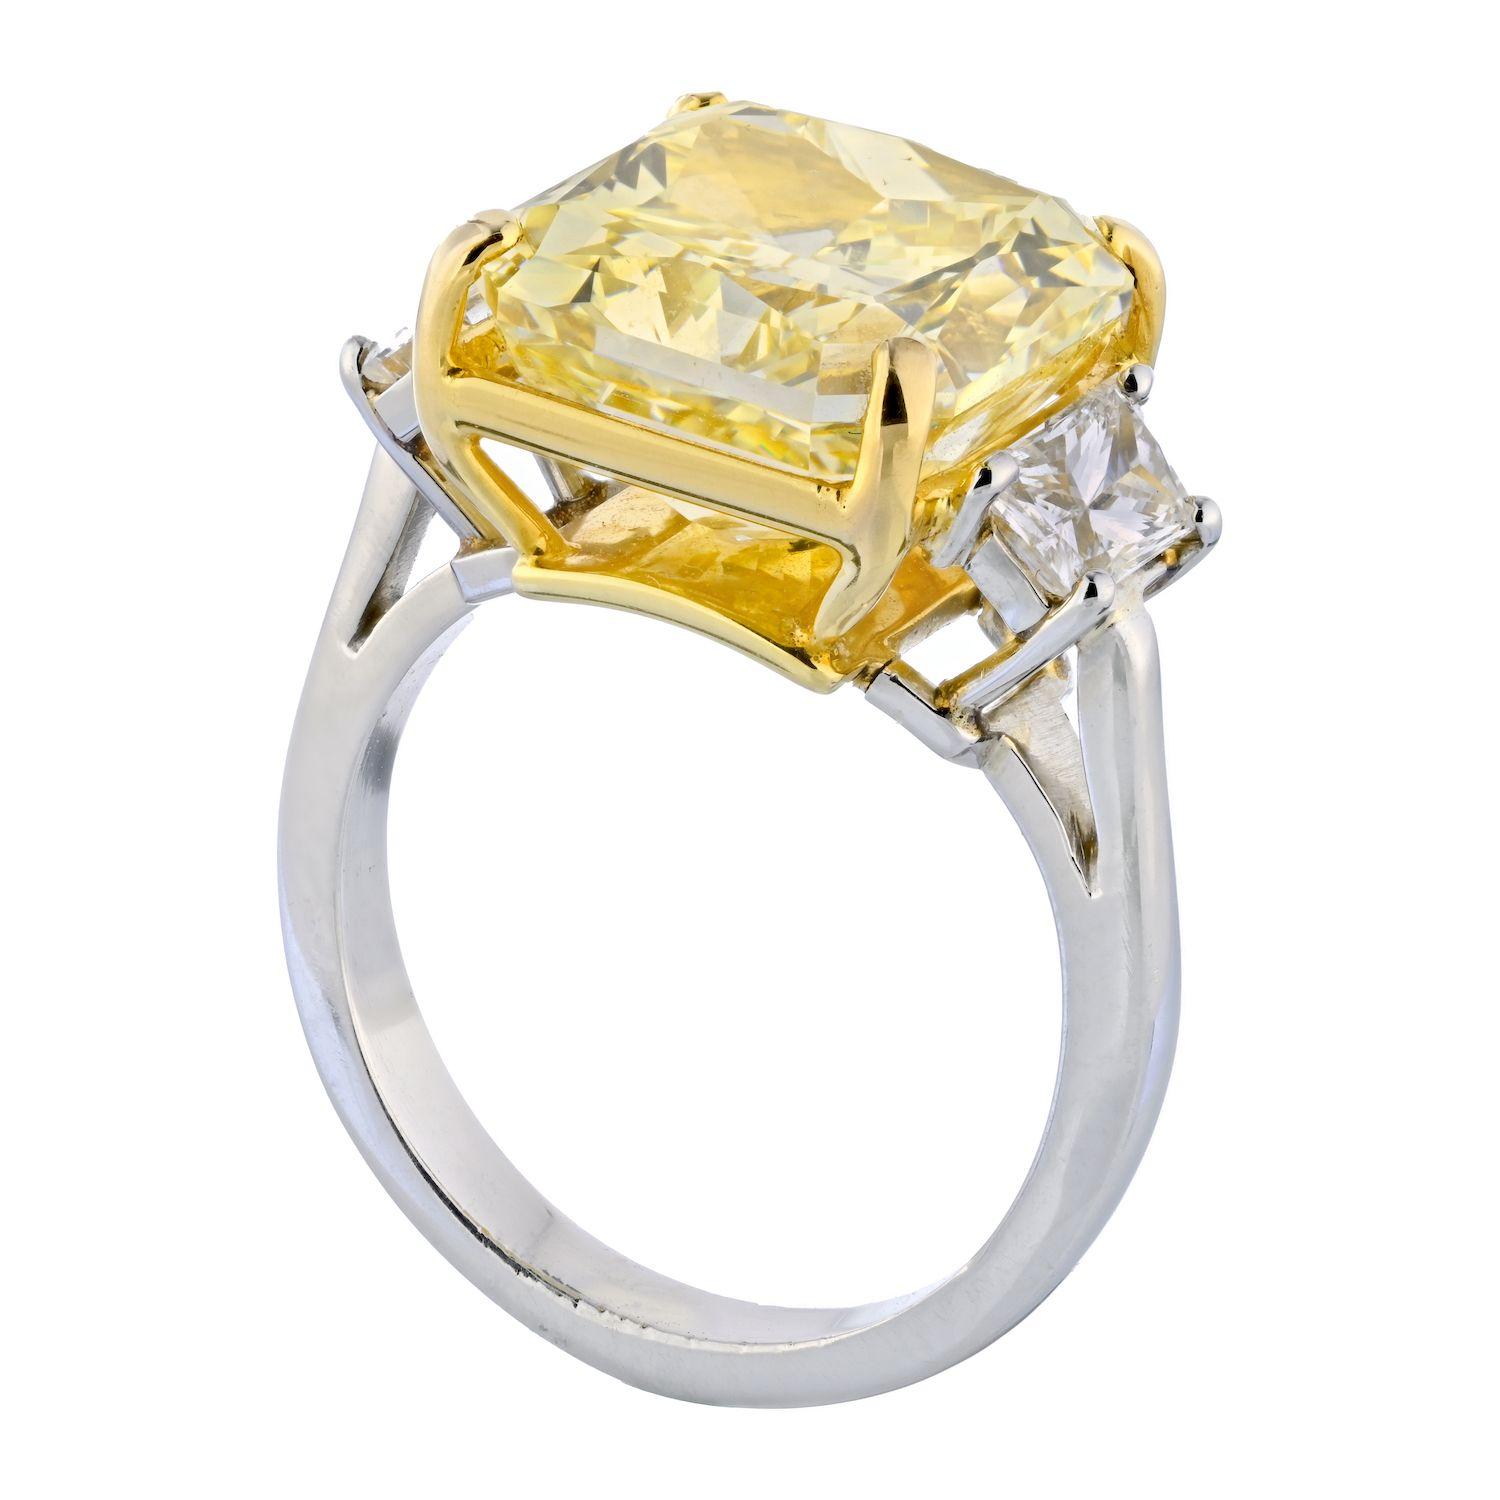 This is a stunning three stone diamond engagement ring crafted in Platinum and 18k yellow gold, mounted with a whopping 10.02 radiant cut diamond that is beyond spectacular. Rest assured everyone will notice you, your hand and your ring the moment